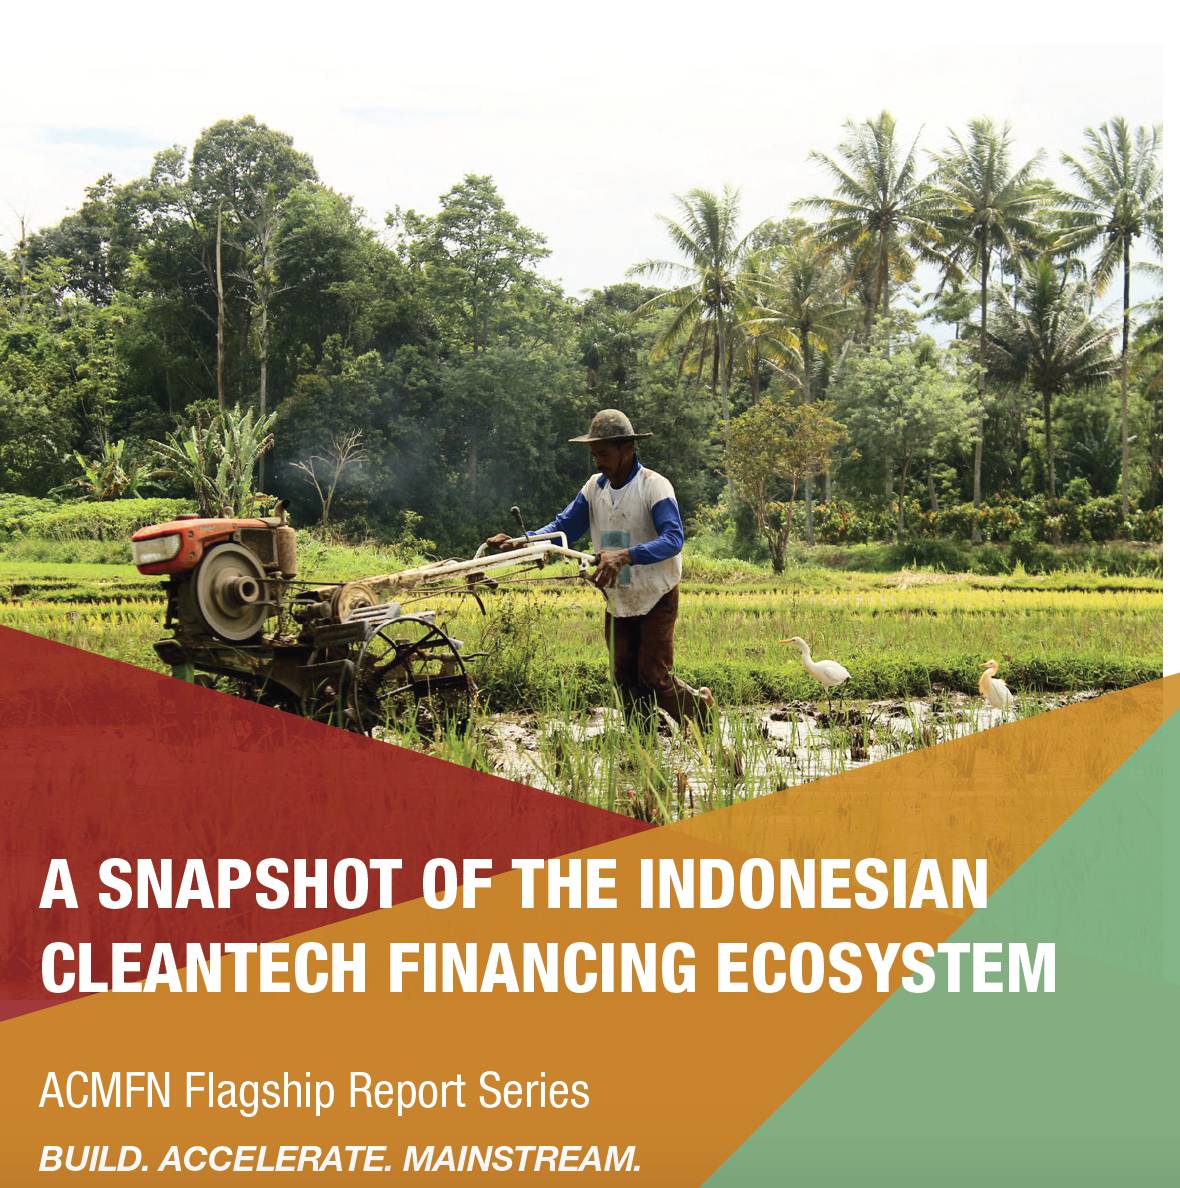 ACMFN Flagship Report Series - Indonesia